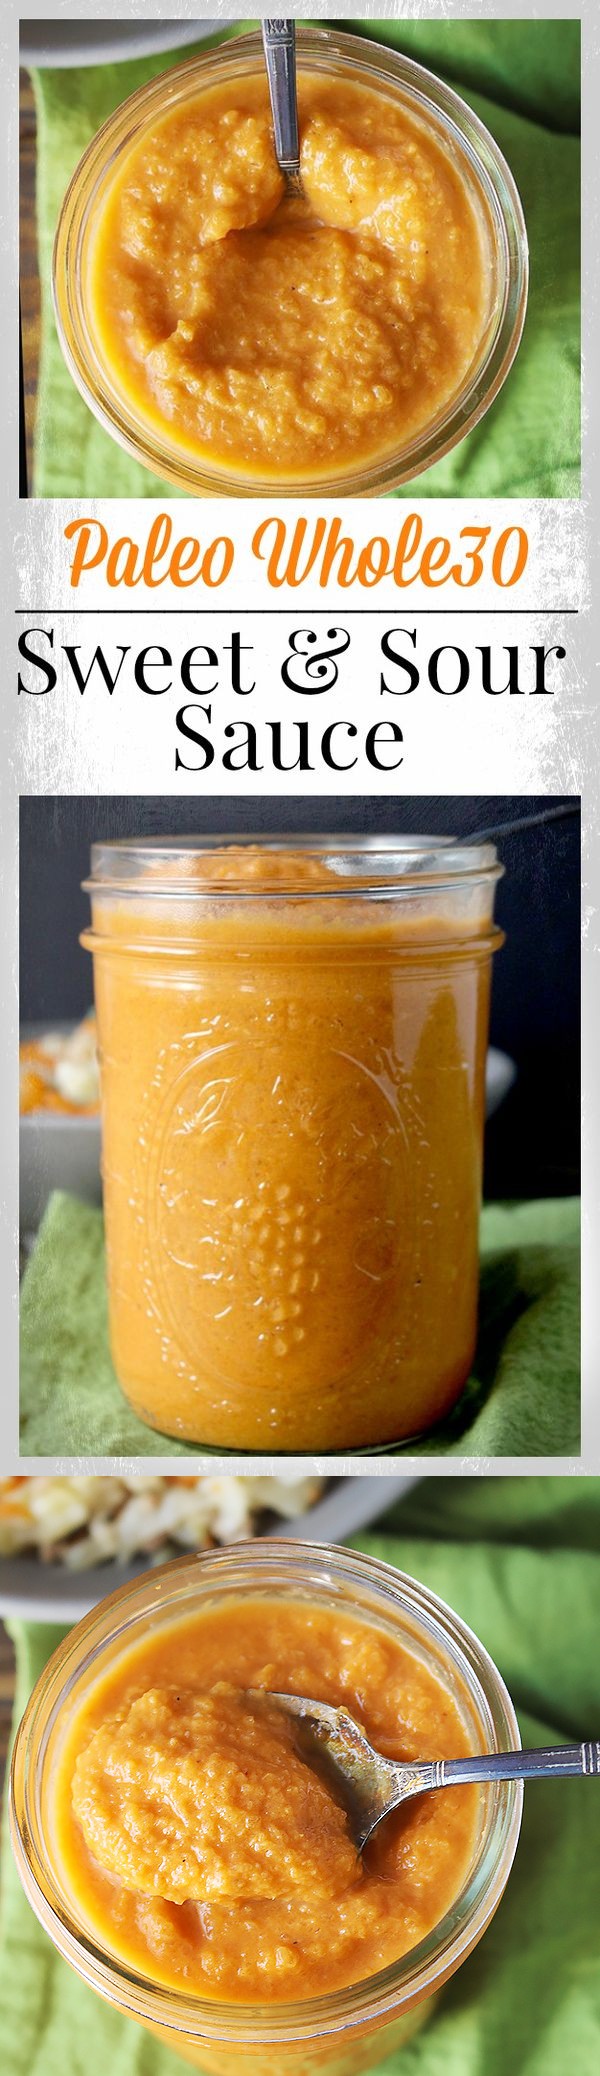 Paleo Whole30 Sweet and Sour Sauce